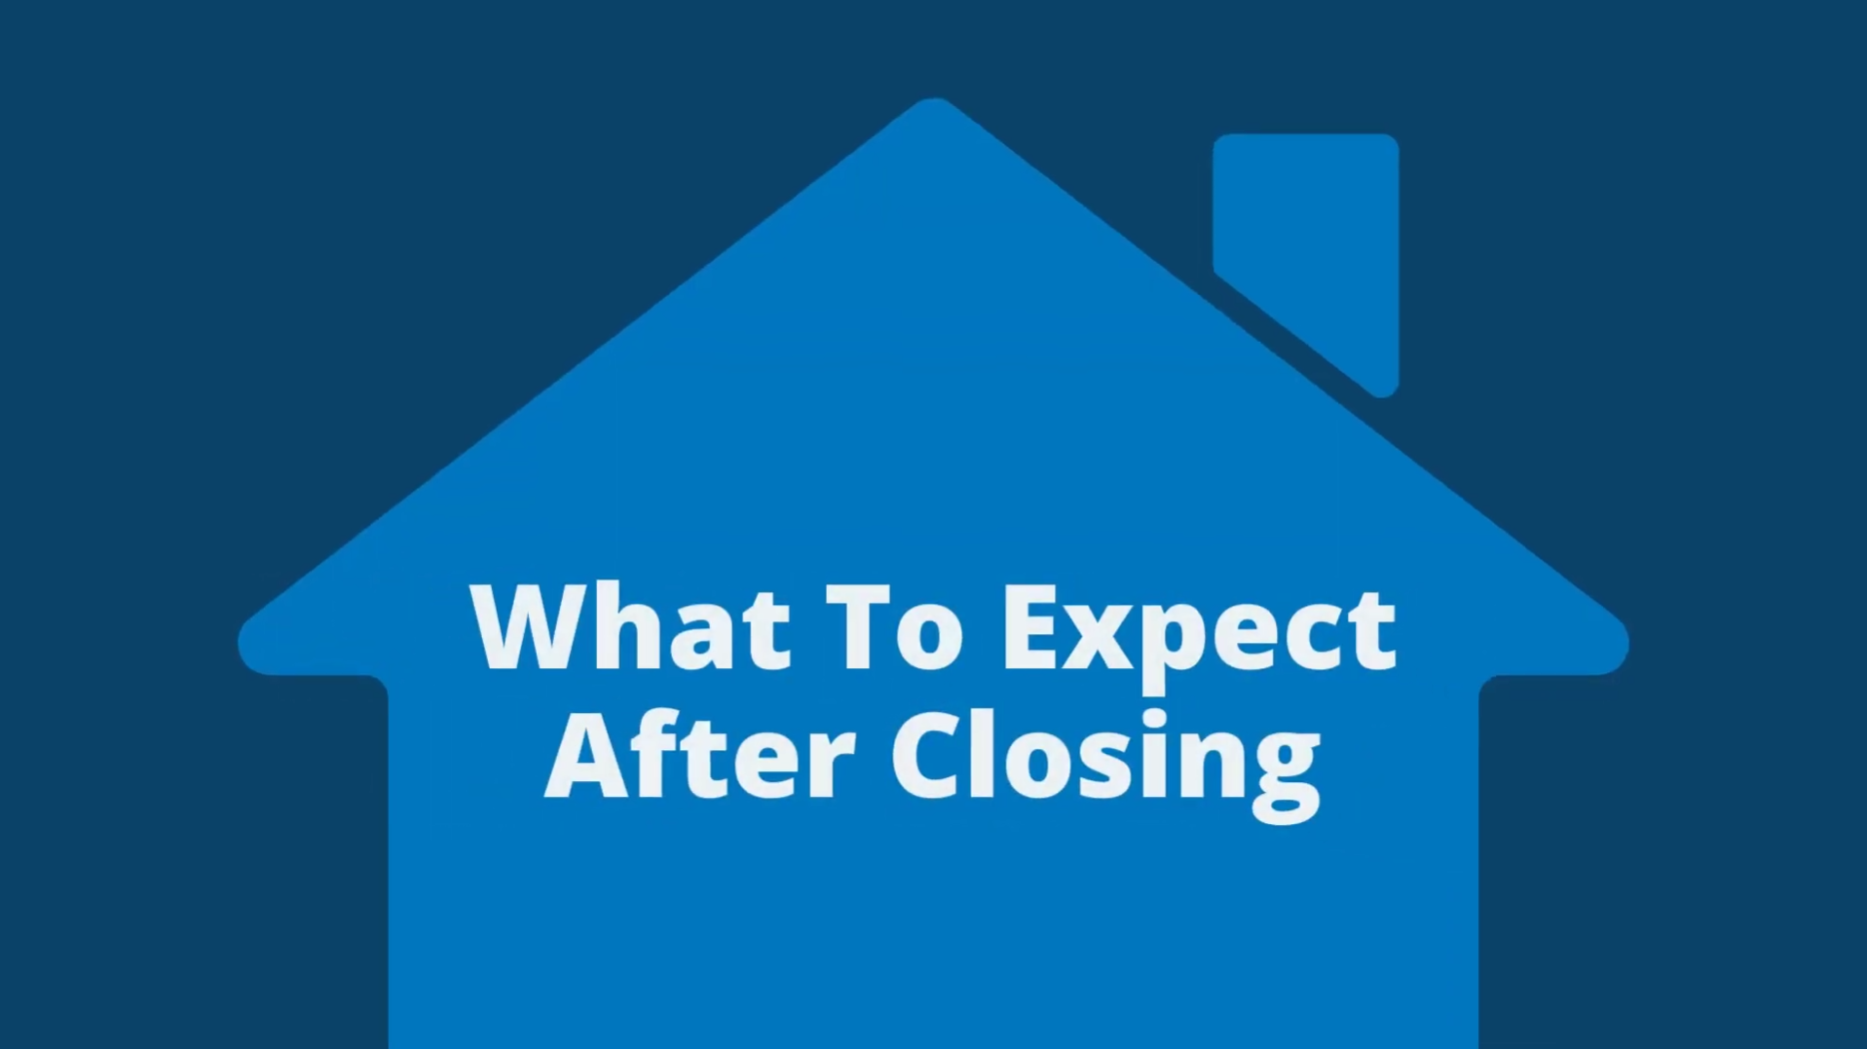 What To Expect After Closing - Servicing Released